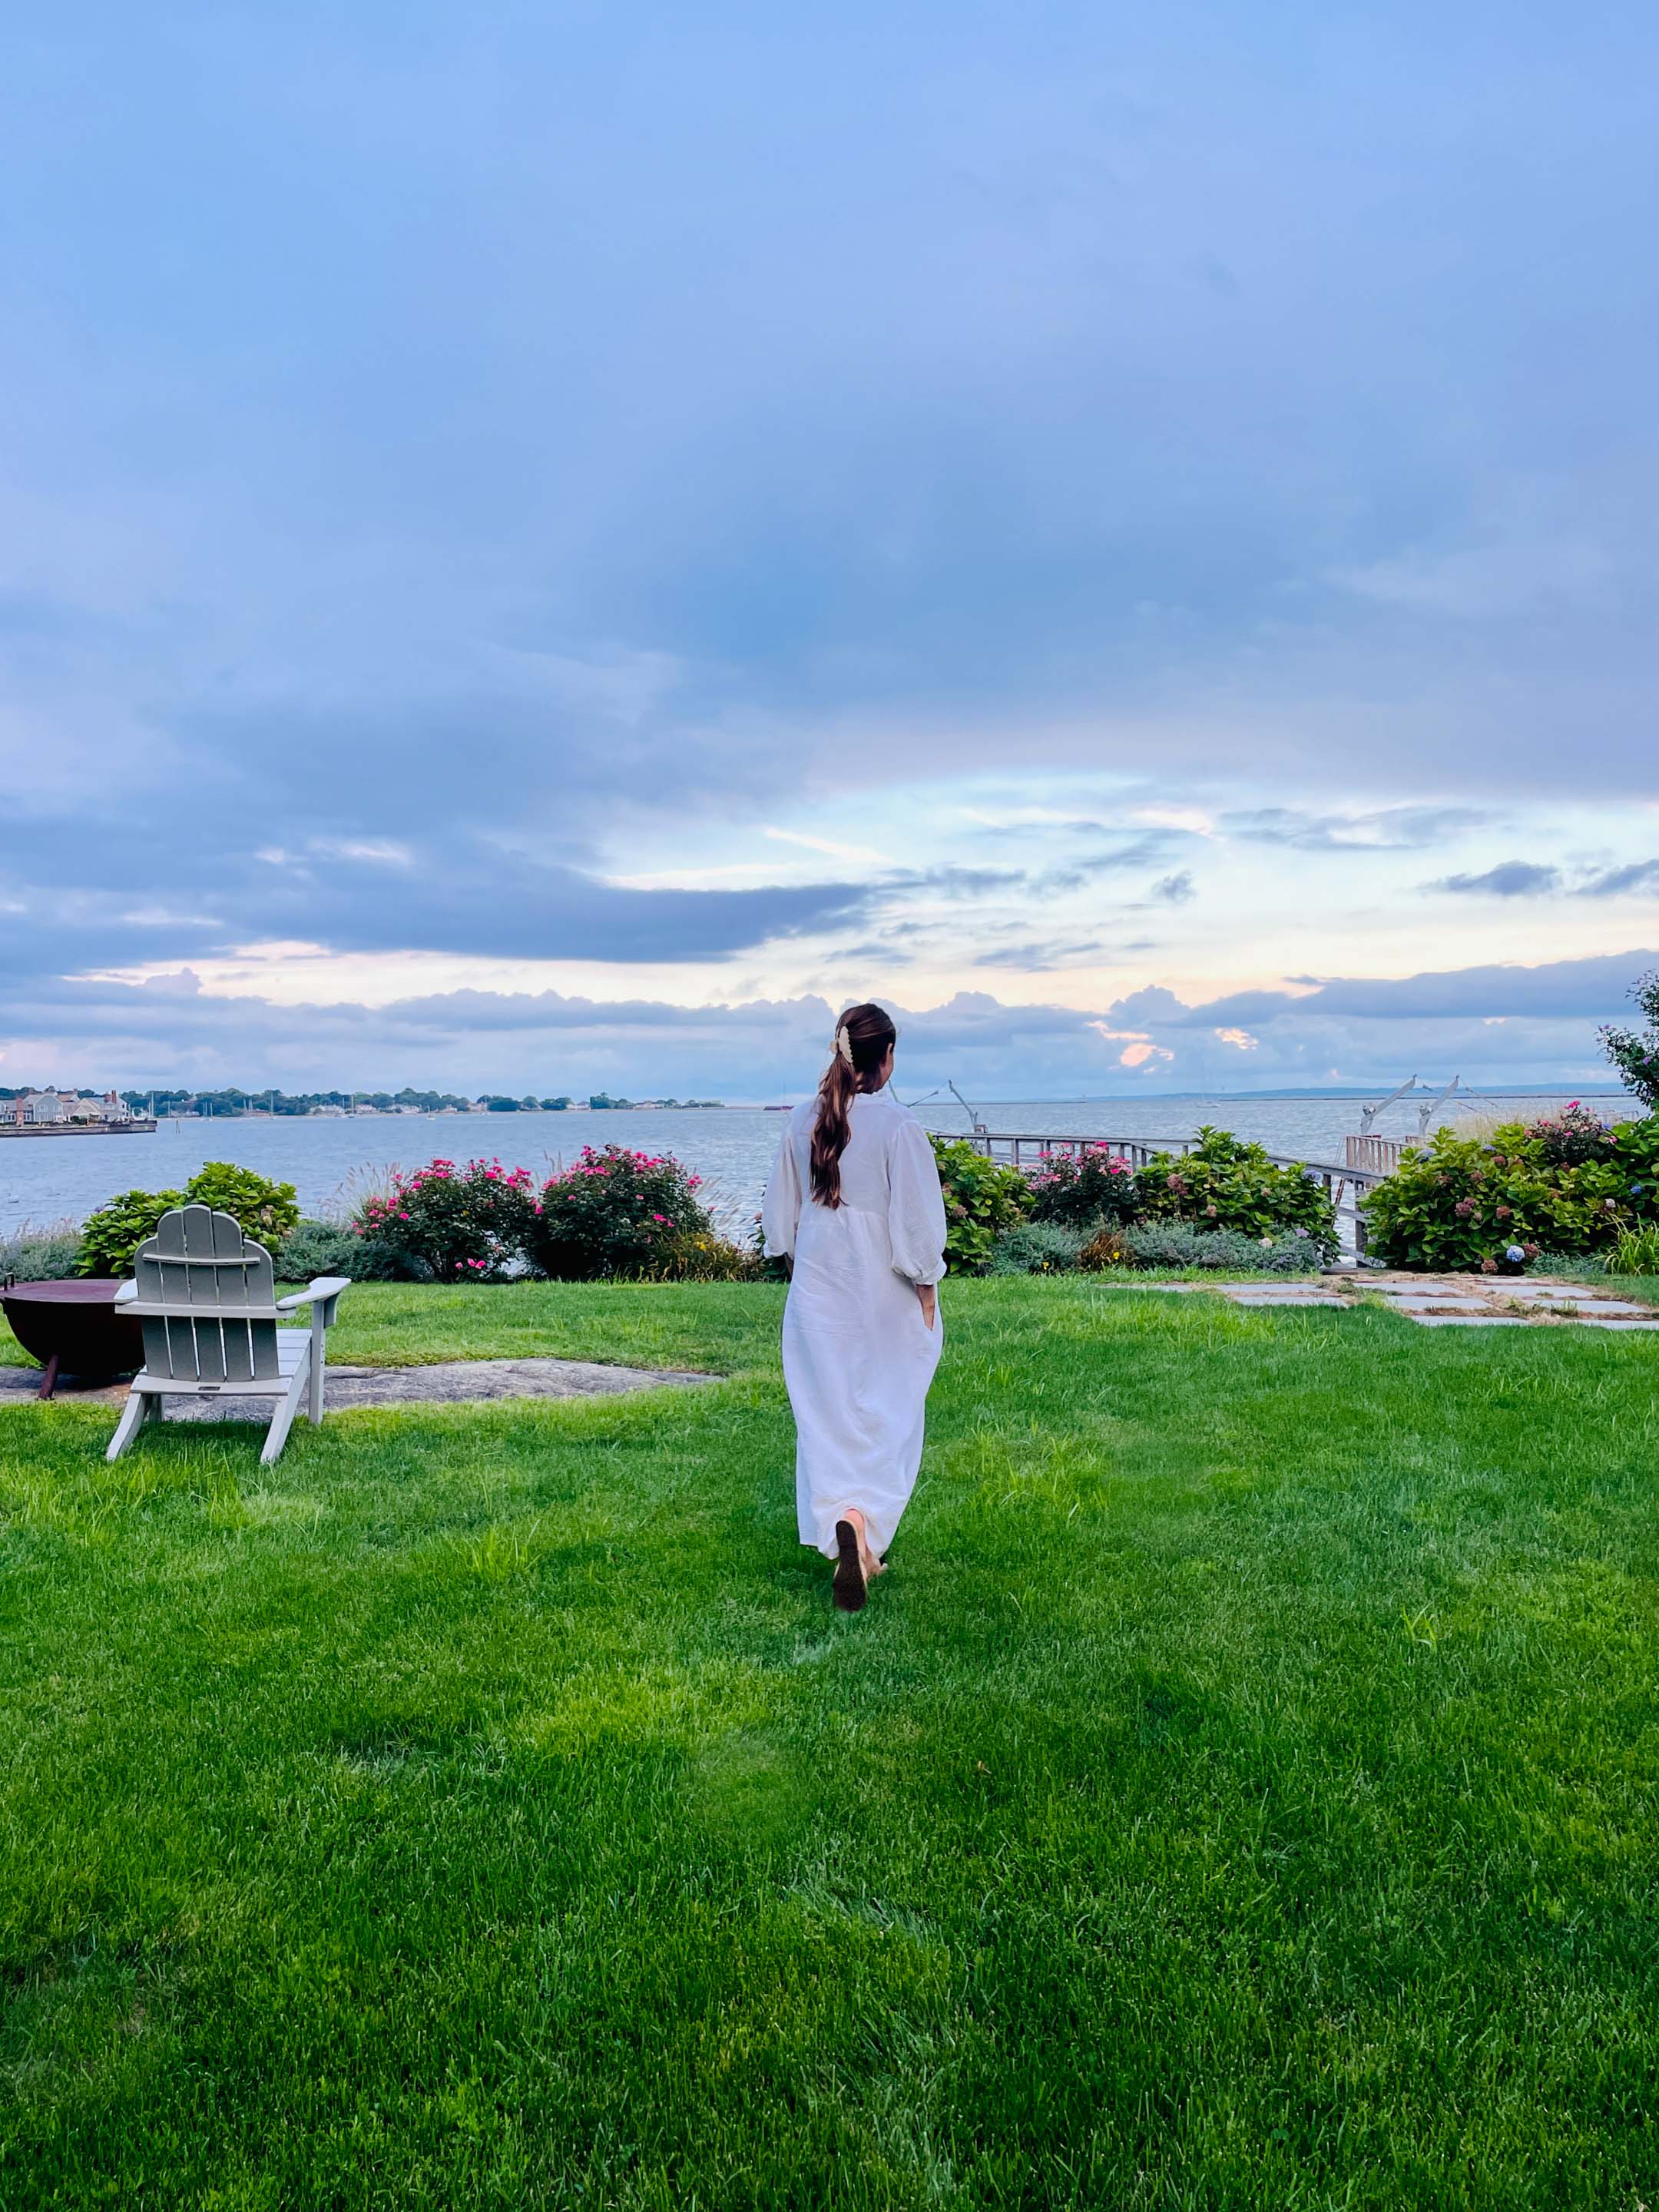 Travel and Lifestyle Photographer - Greenwich, CT Woman Walking to Water